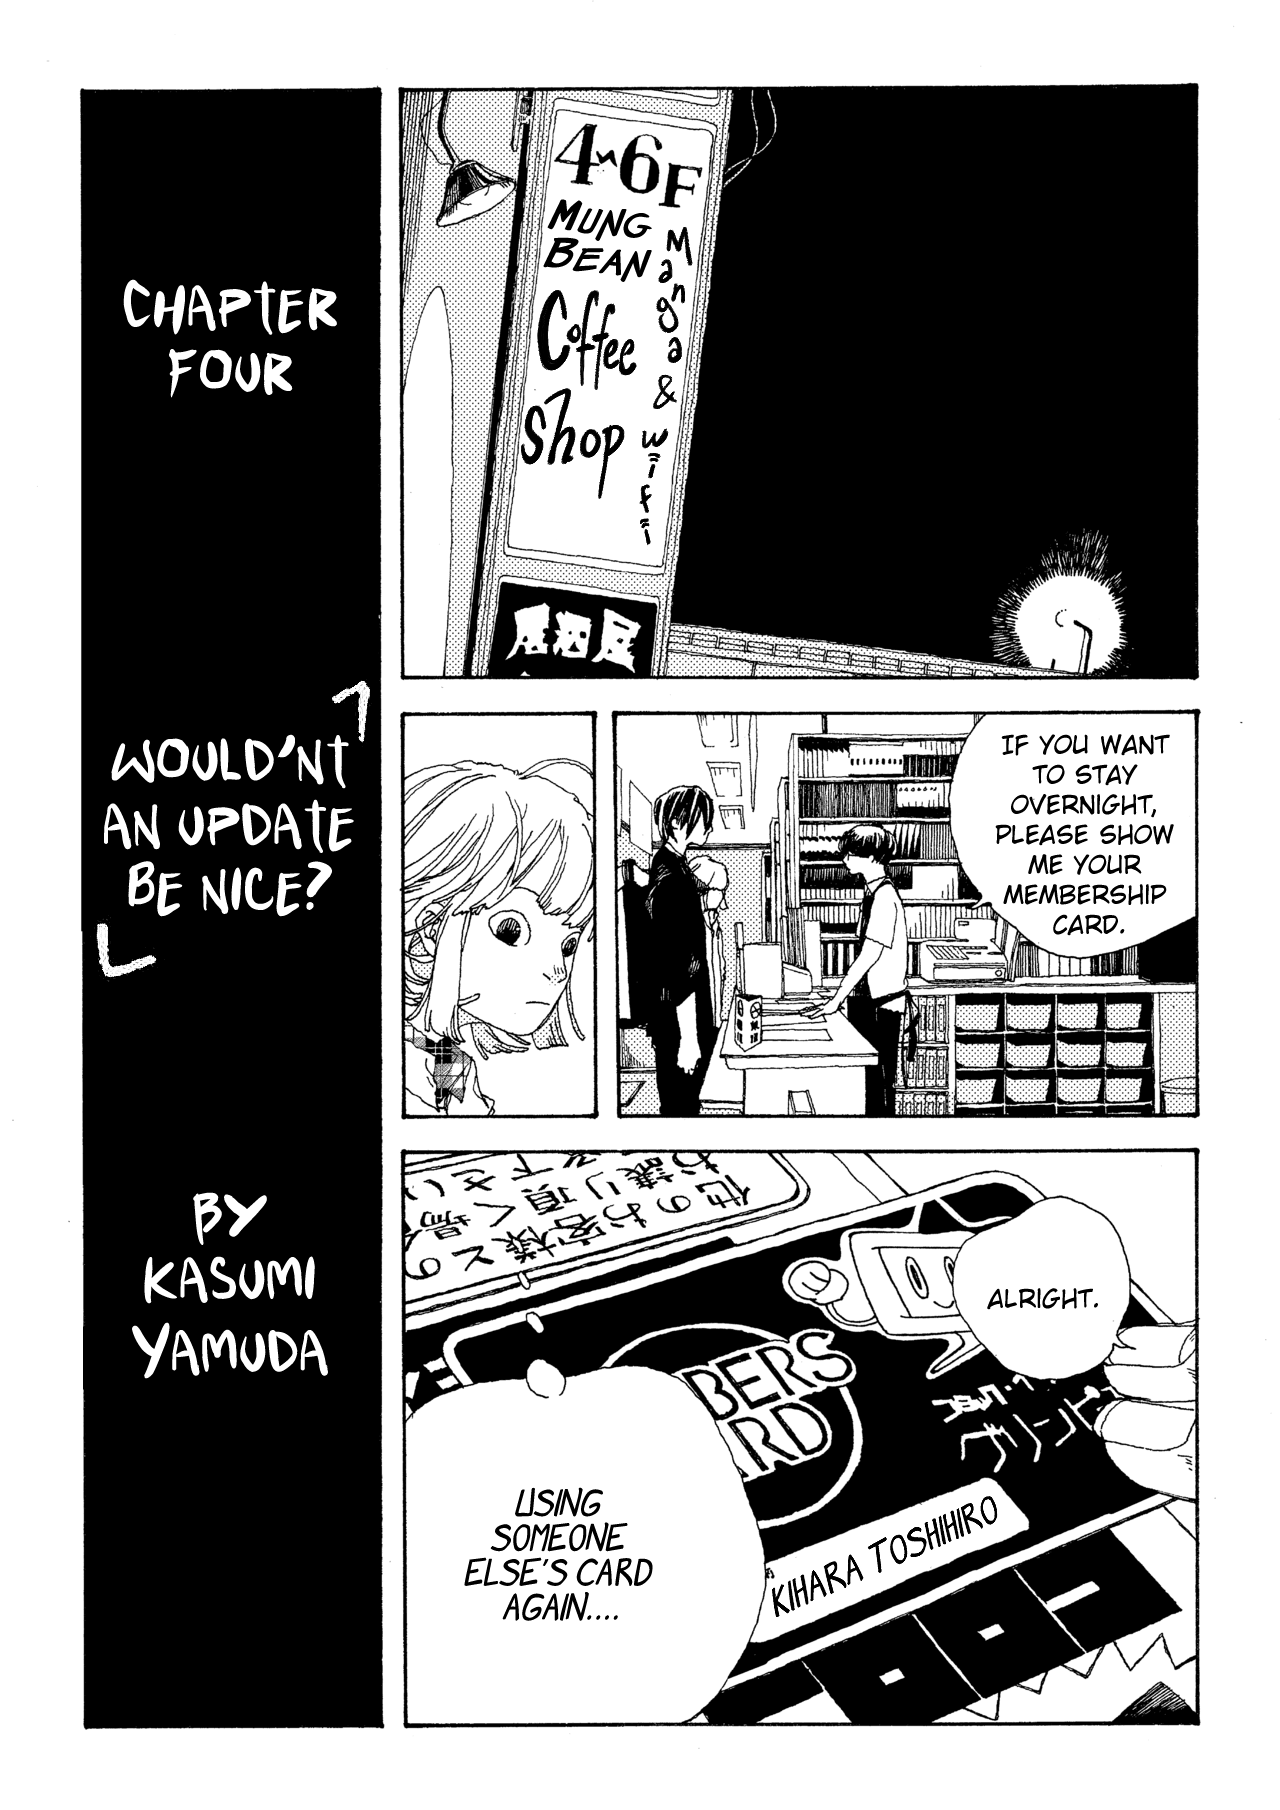 Denpa Seinen Vol.1 Chapter 4: Wouldn't An Update Be Nice? - Picture 2